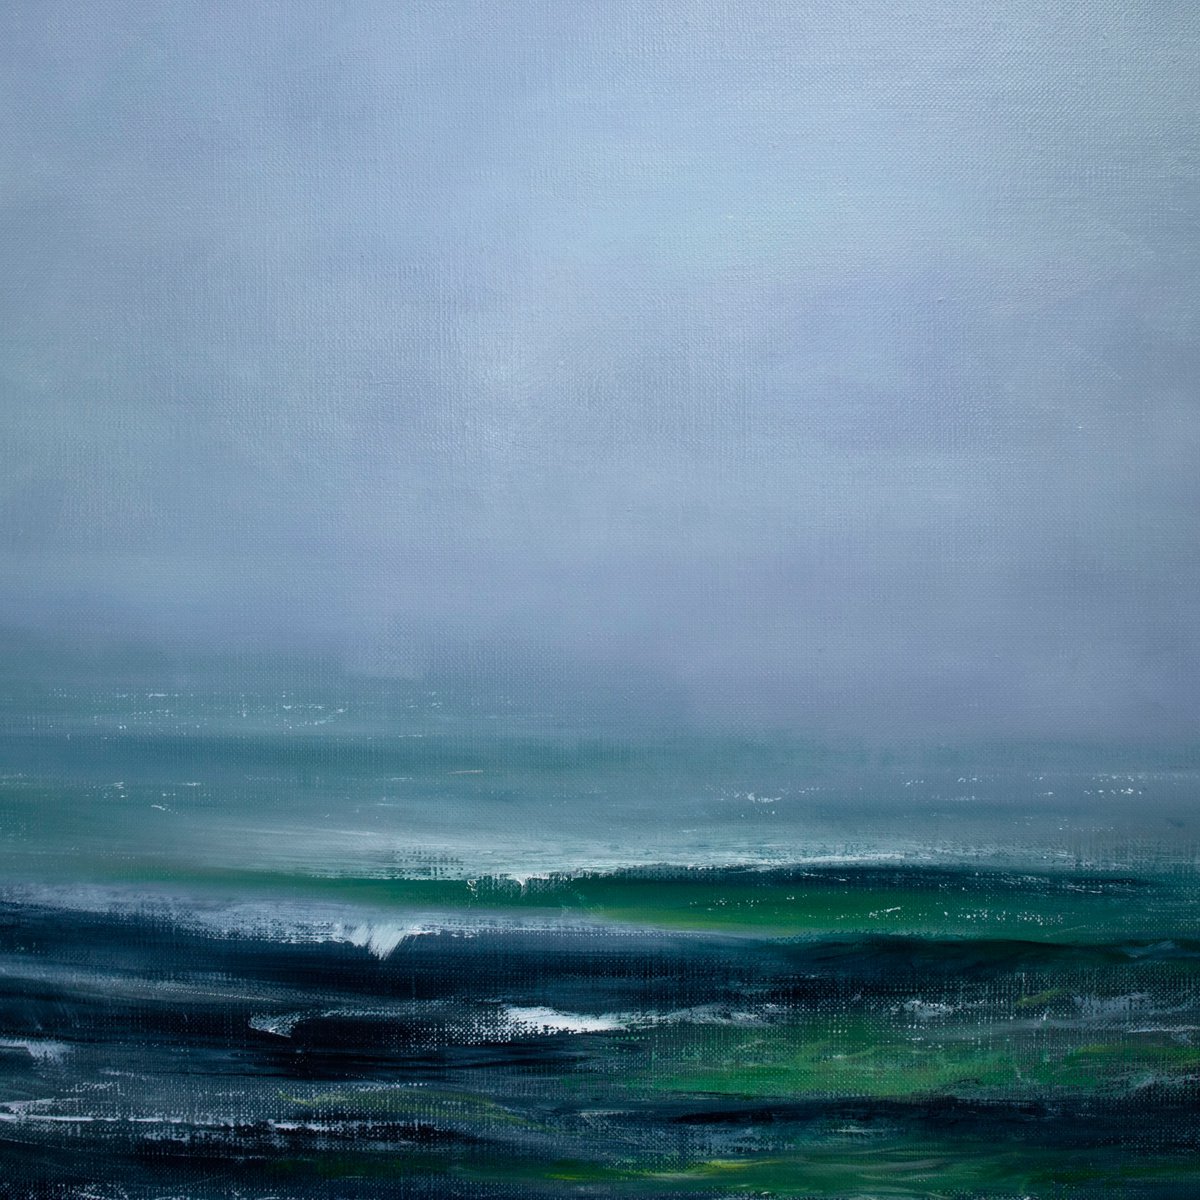 Waves painting Ocean Seascape large by Anna Lubchik